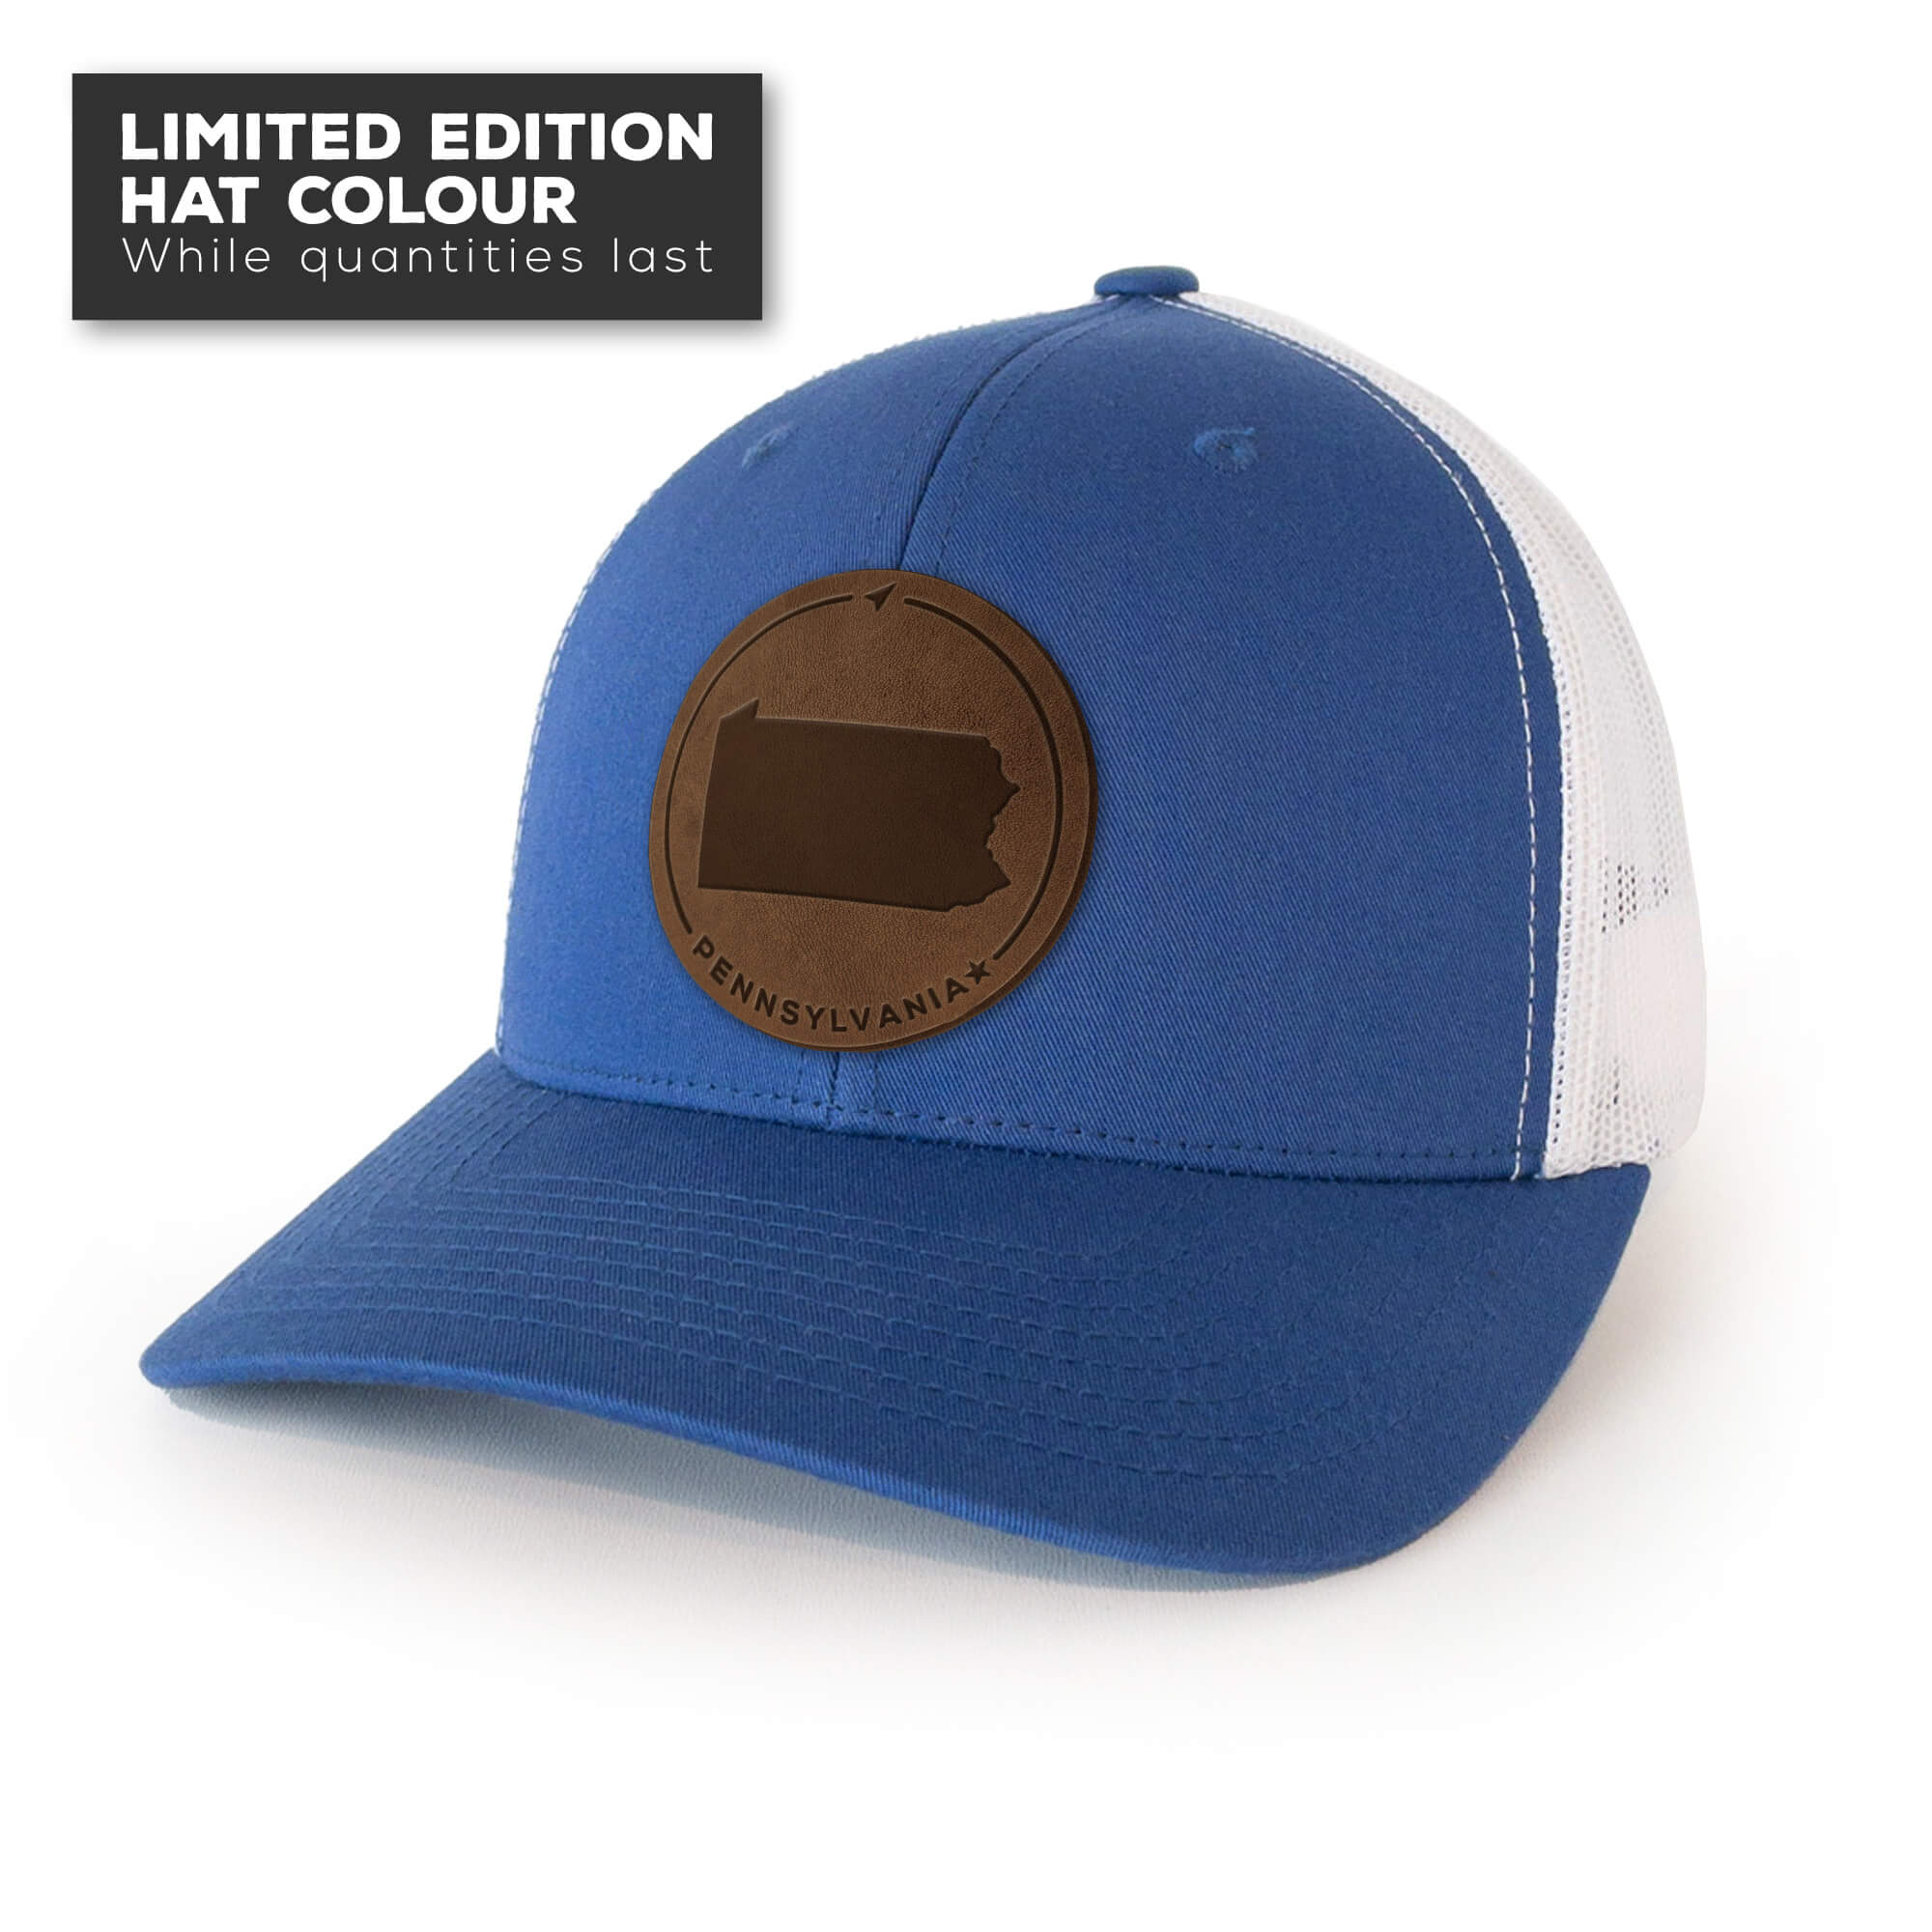 Royal Blue trucker hat with full-grain leather patch of Pennsylvania